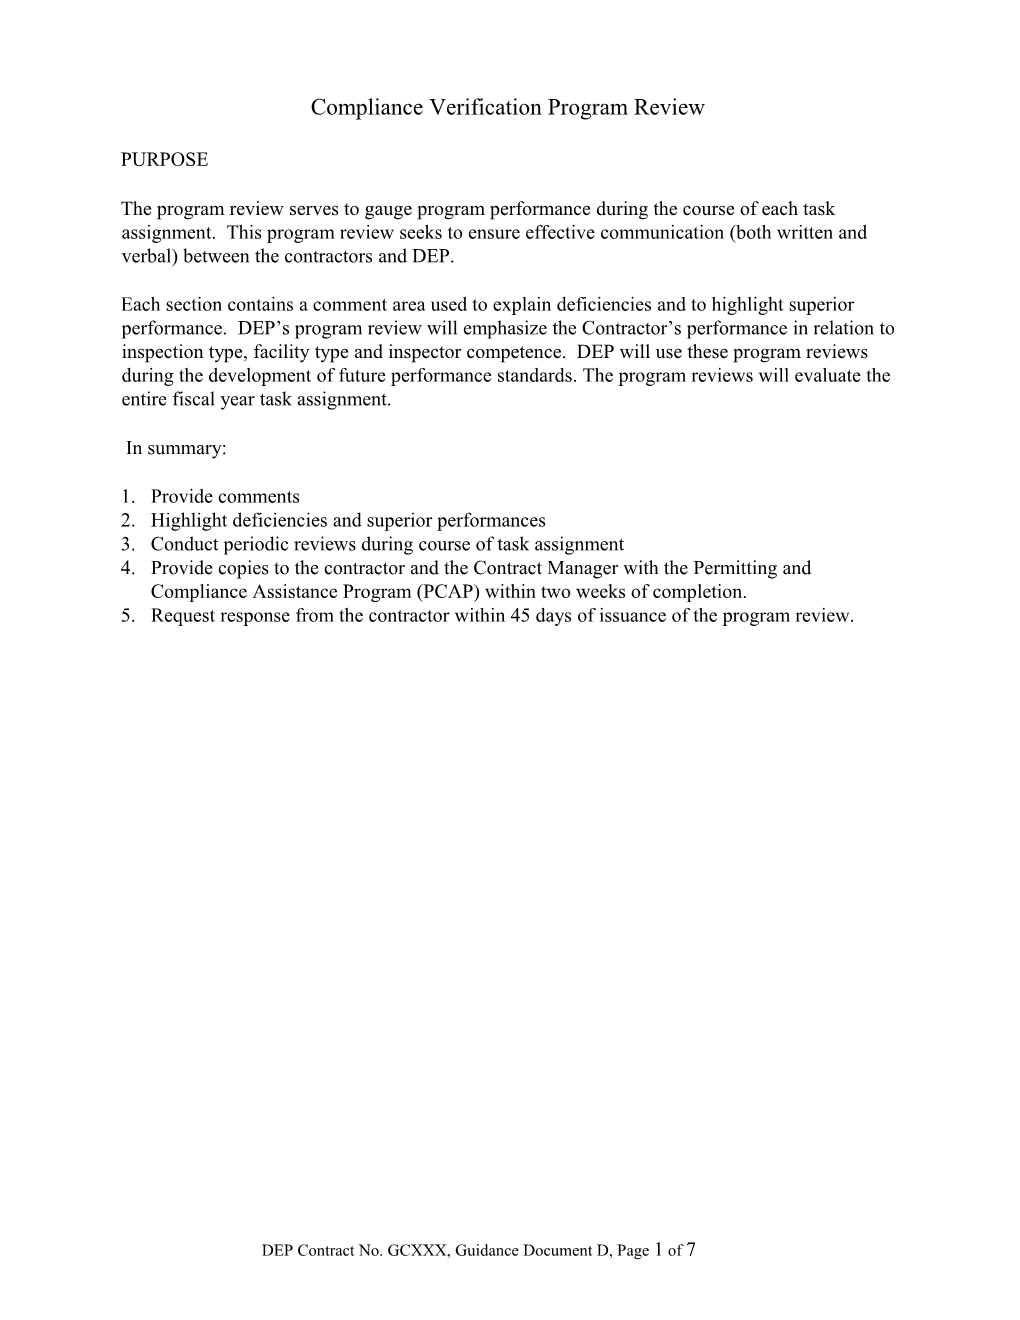 New Guidance Document D July 2012